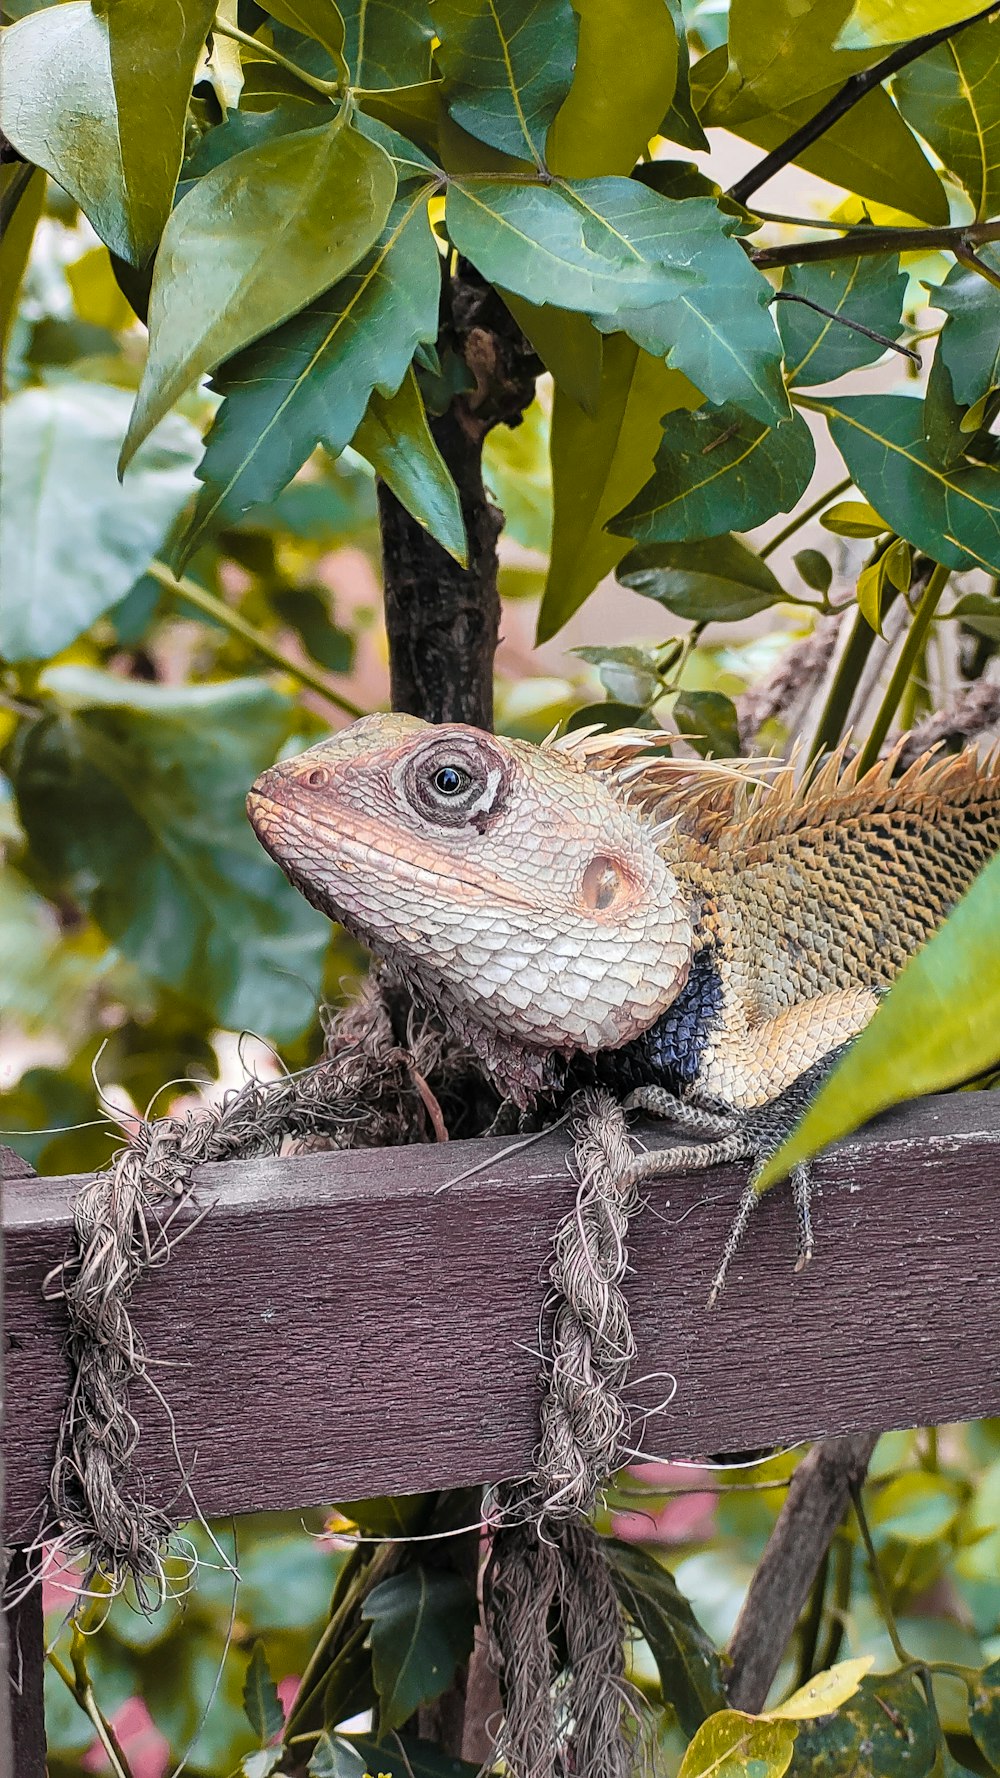 green and brown bearded dragon on brown wooden fence during daytime